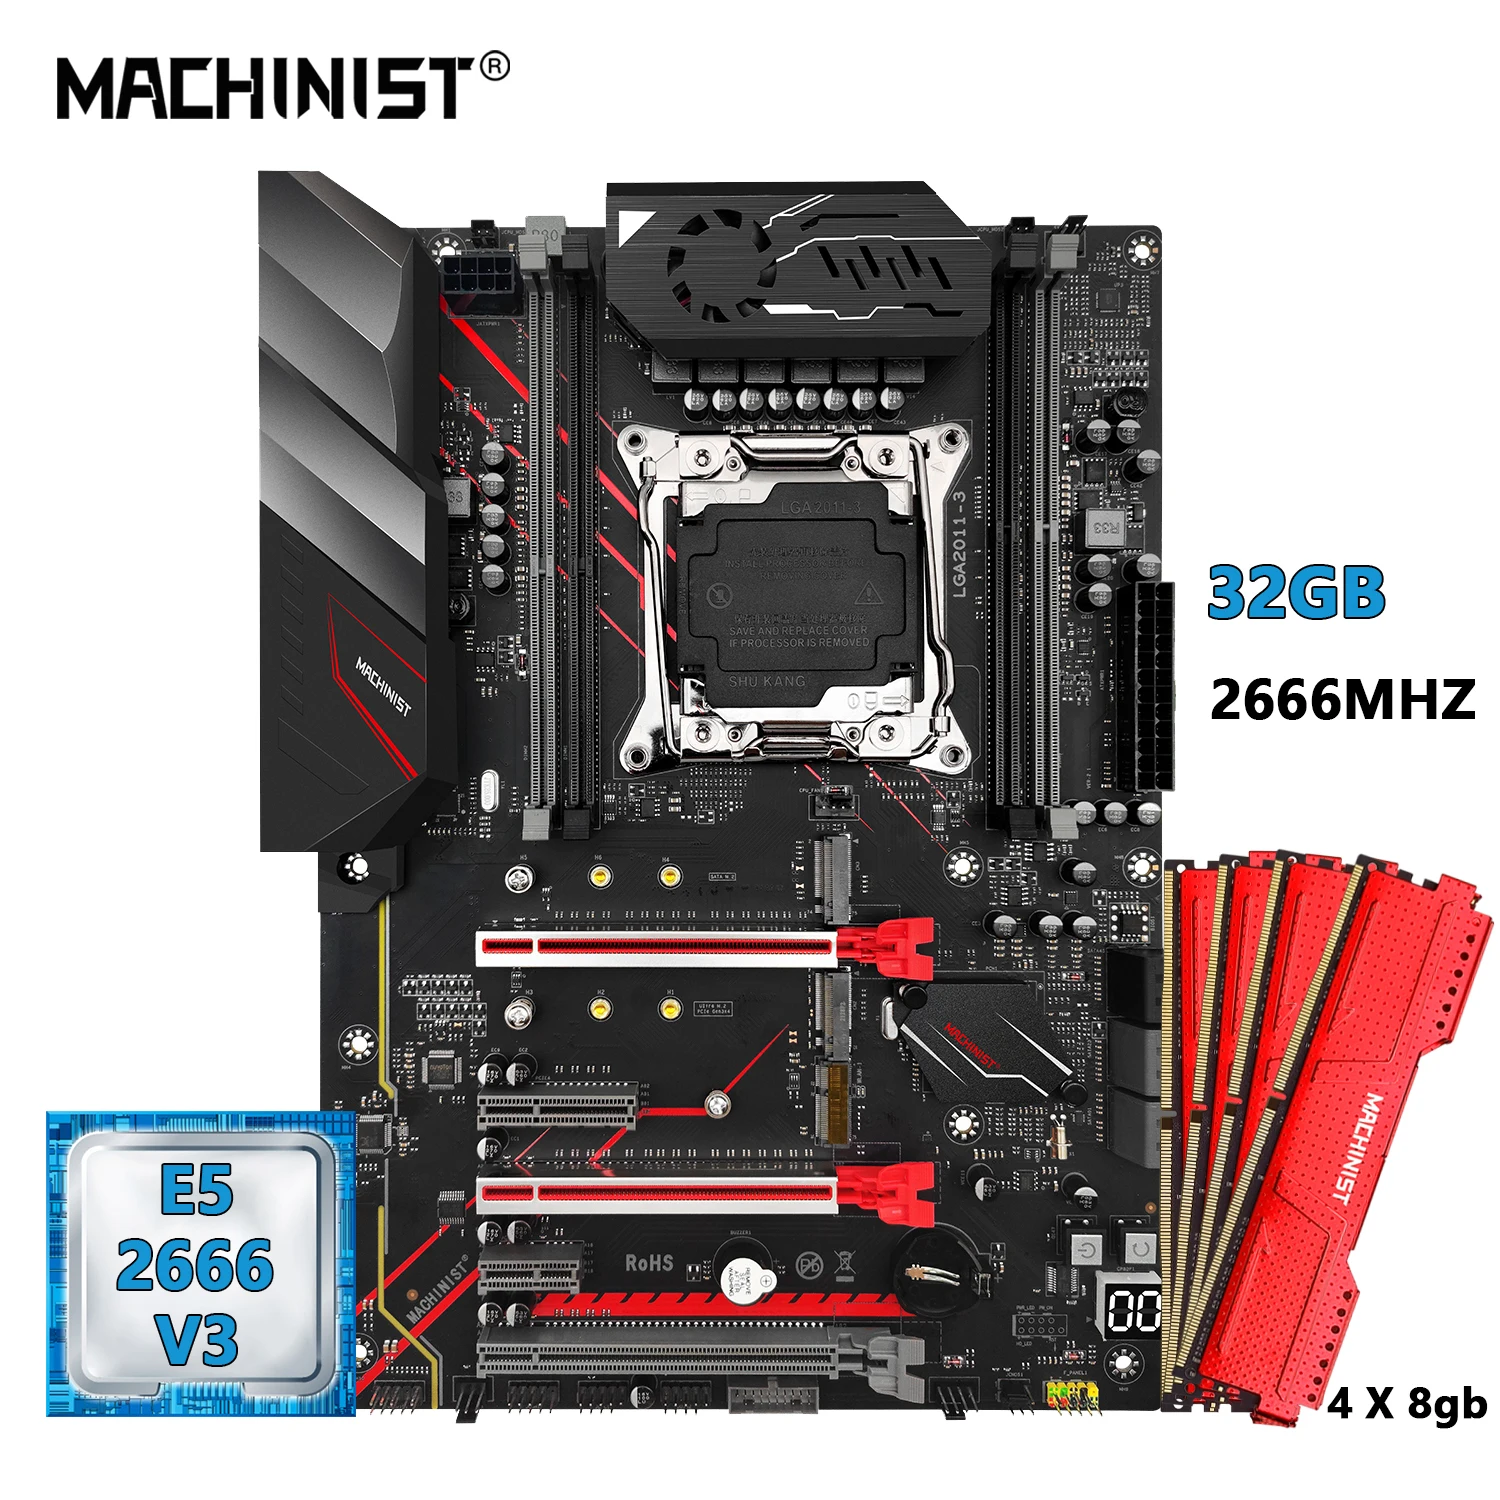 MACHINIST X99 Motherboard Combo Set Kit with Xeon E5 2666 V3 LGA 2011-3 CPU and DDR4 32GB RAM Memory ATX X99 MR9A Pro V2